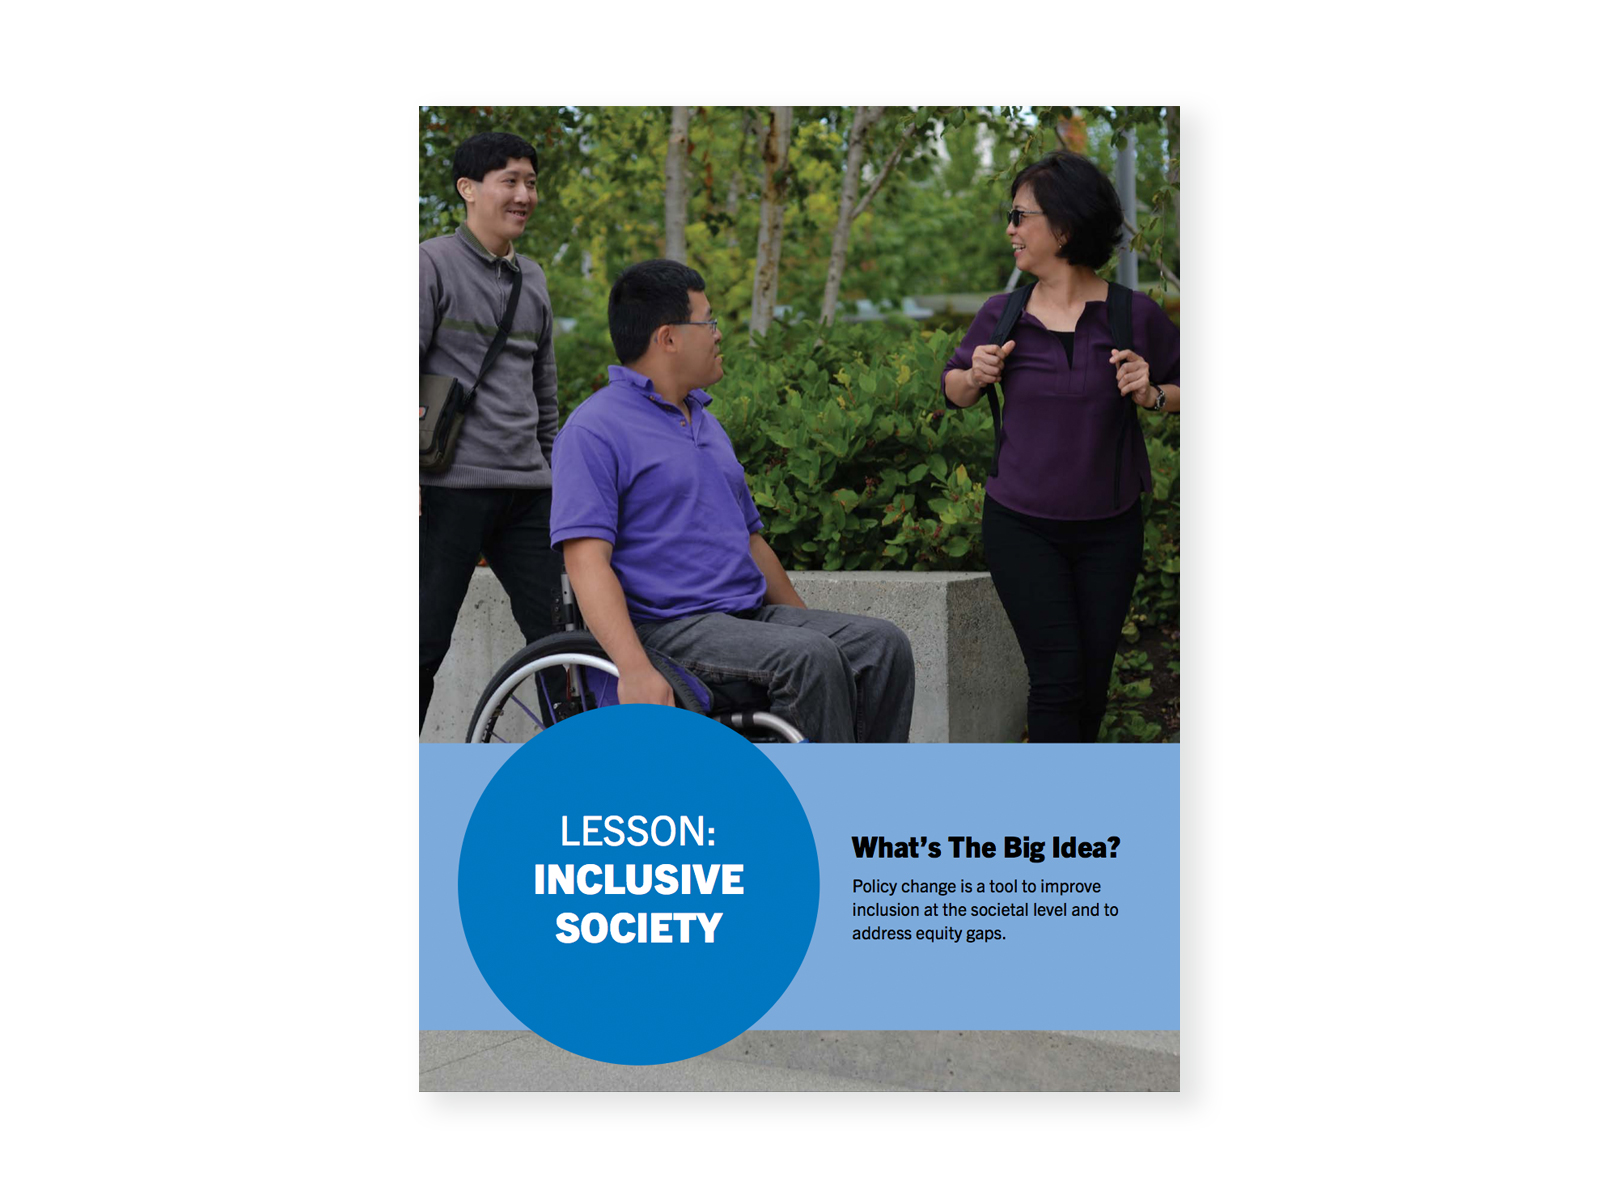 Two men and a woman on a sidewalk conversing. One man is using a wheelchair. Cover of "Inclusive Society" lesson.